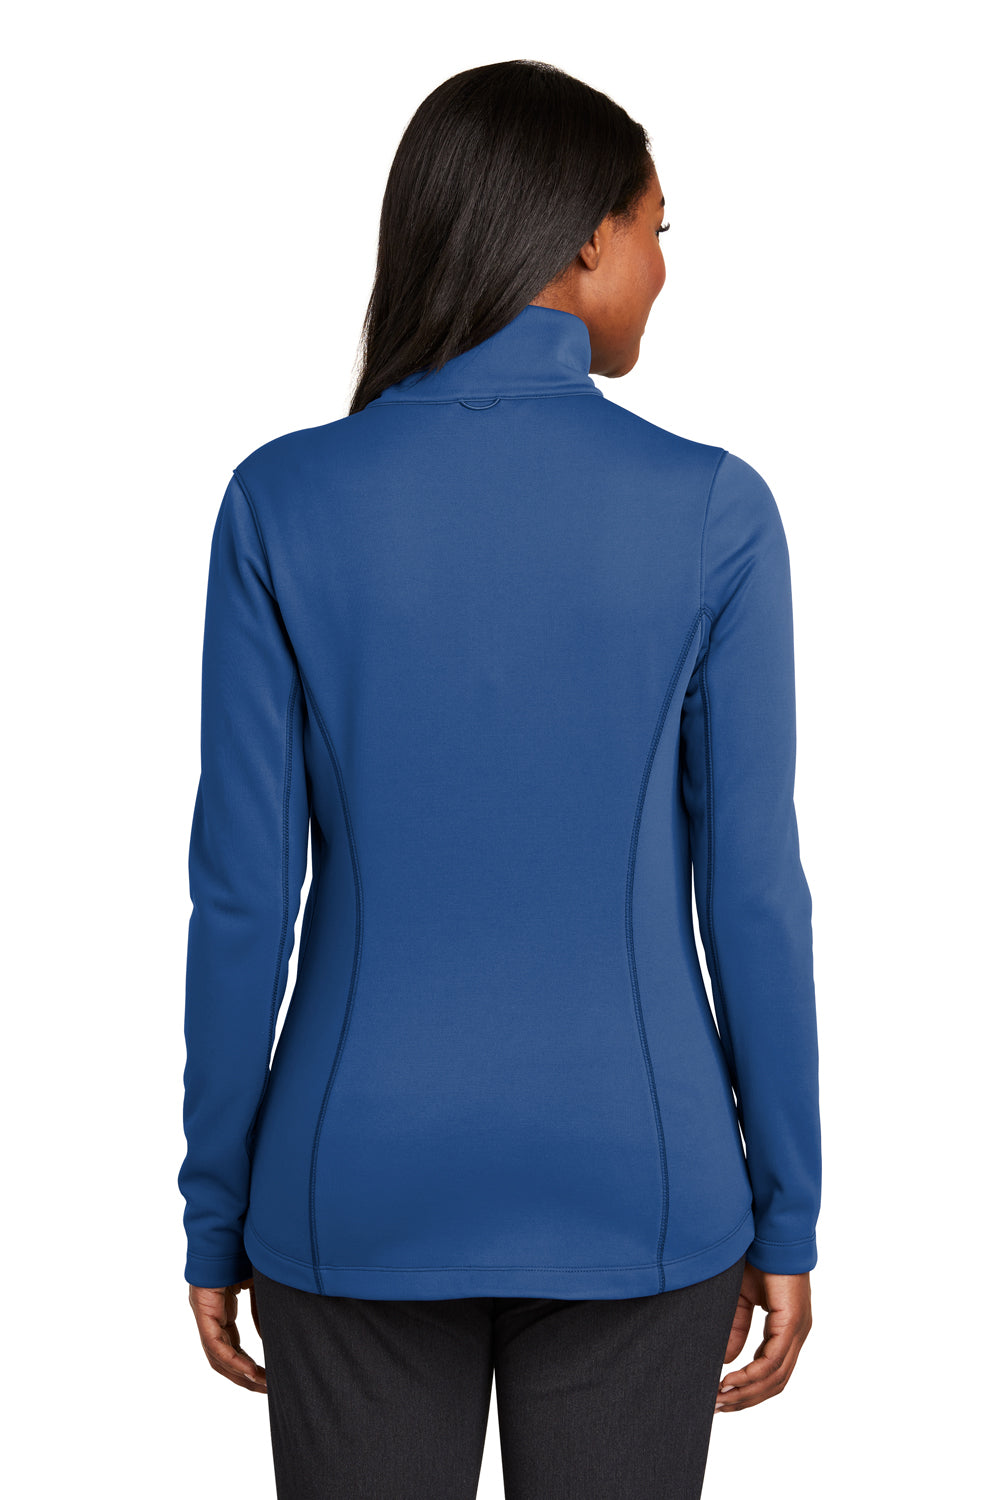 Port Authority L904 Womens Collective Full Zip Smooth Fleece Jacket Night Sky Blue Back